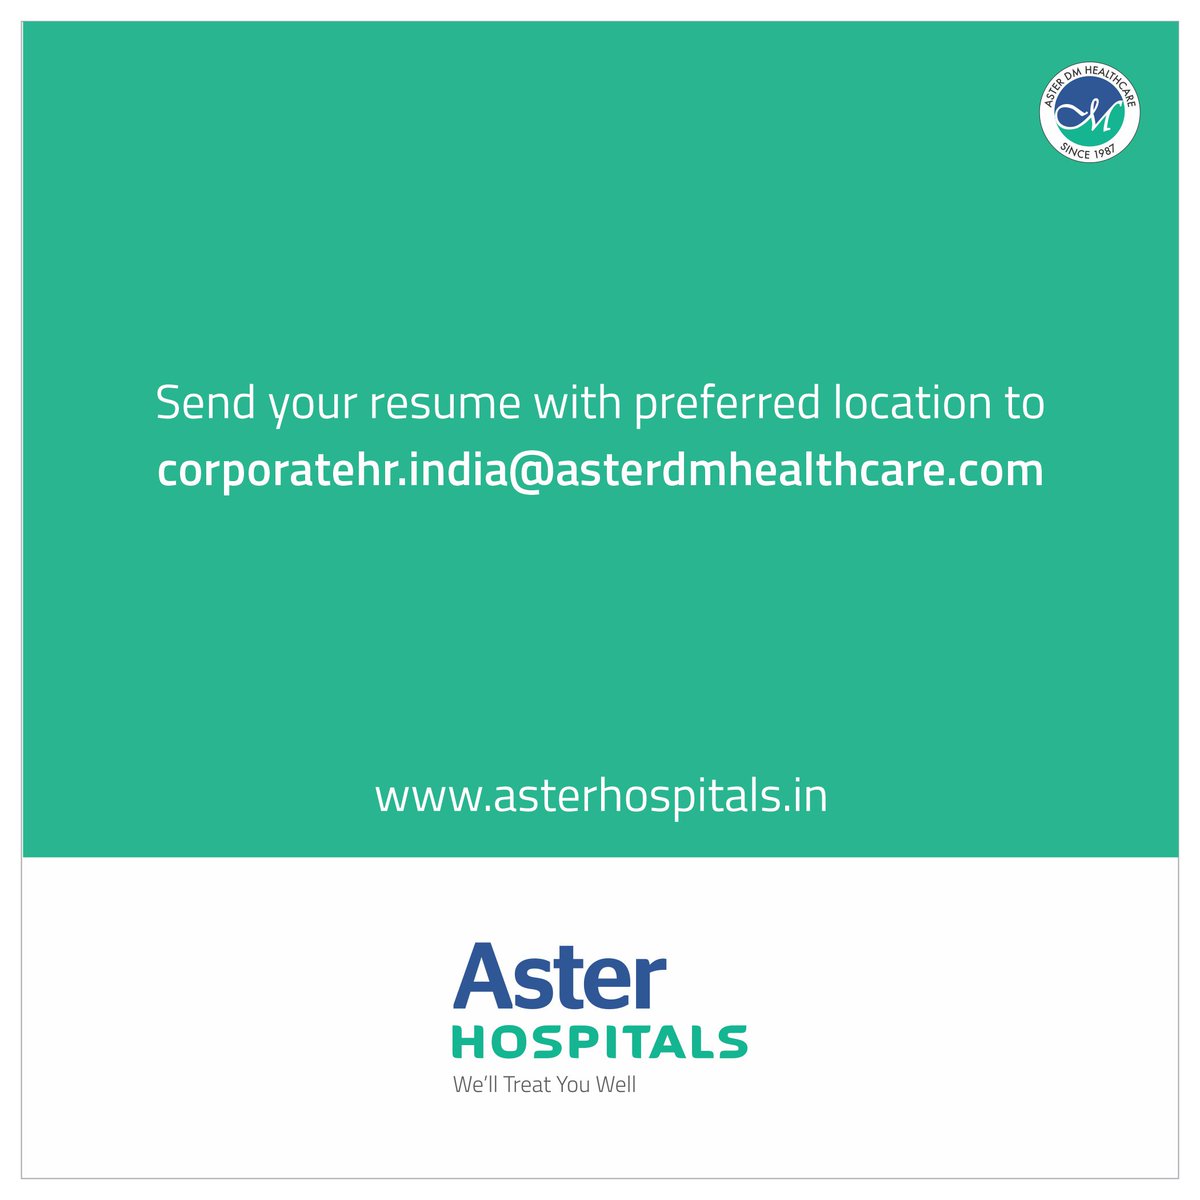 Join global experts at Aster Hospitals. Hiring across specialties all over India. Email resume to corporatehr.india@asterdmhealthcare.com
#asternarayanadrihospital #aster #vacancies #jobs #hiring #asterhospitals #recruitment #asterhospitals #asterdmhealthcare #healthcarejobs